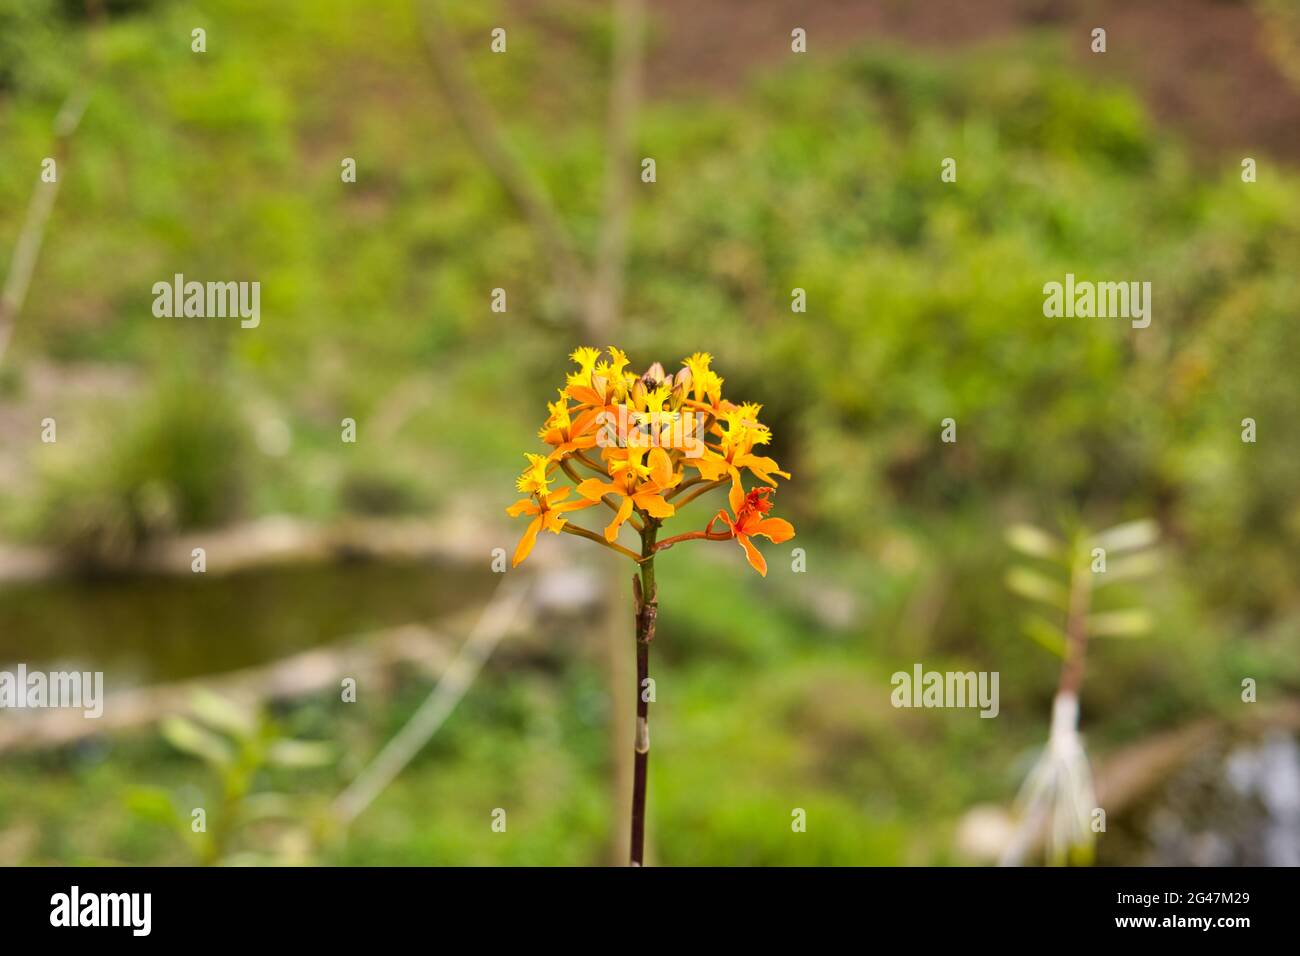 Epidendrum flower in a field Stock Photo